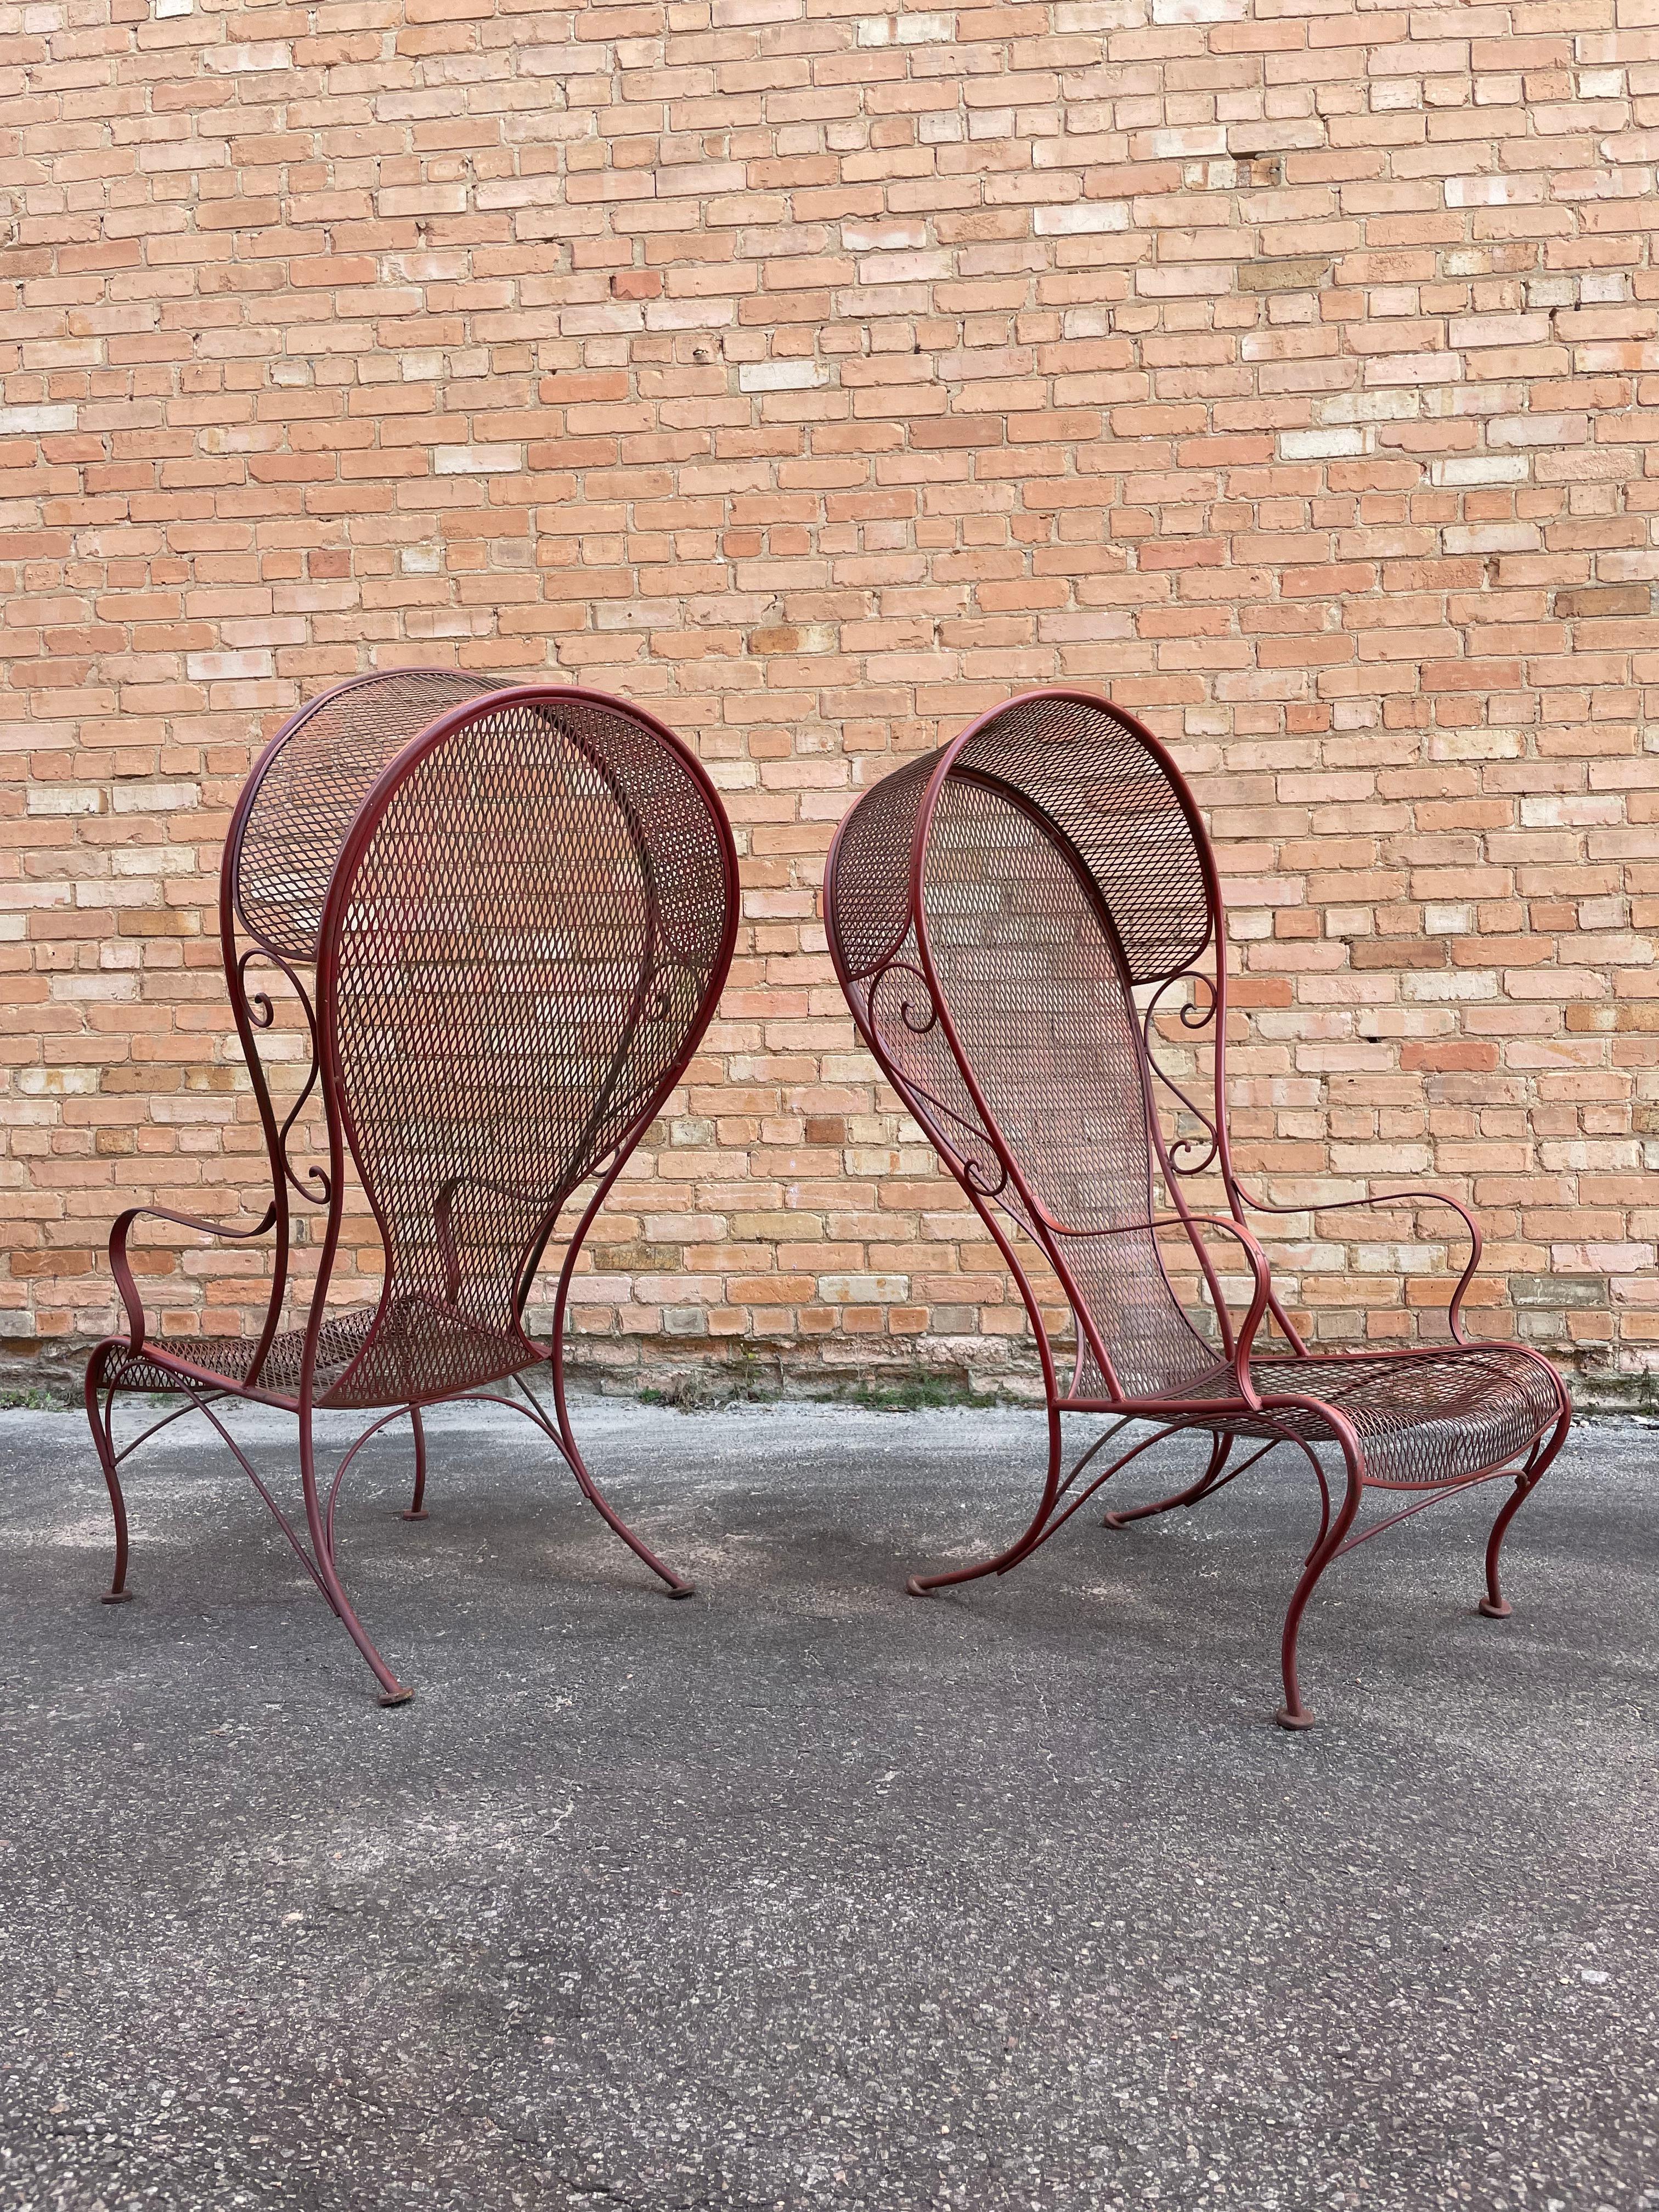 A rare, beautiful pair of Herbert Saiger for Russell Woodard canopy lounge chairs in painted red wrought iron fabricated in the signature Woodard Furniture Company style. Each patio armchair features dramatic oversized canopies flanked by lovely,